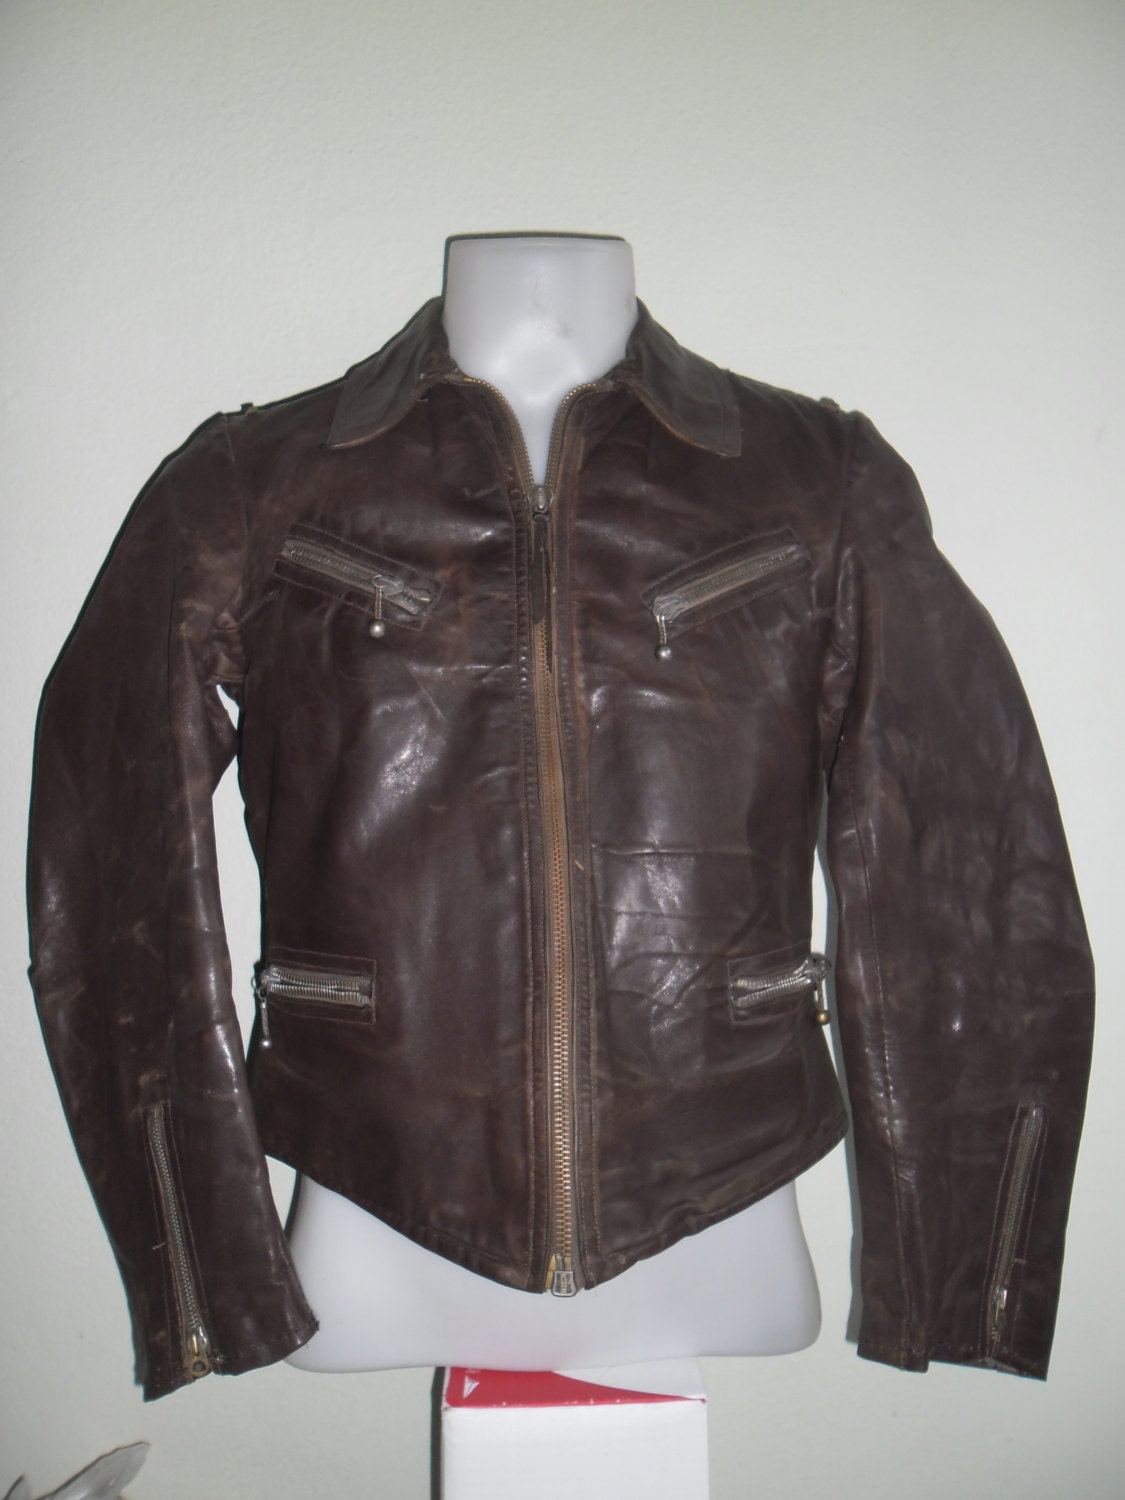 Stunning WW2  Luftwaffe Flight Leather  Jacket  by BoutiqueEtsy